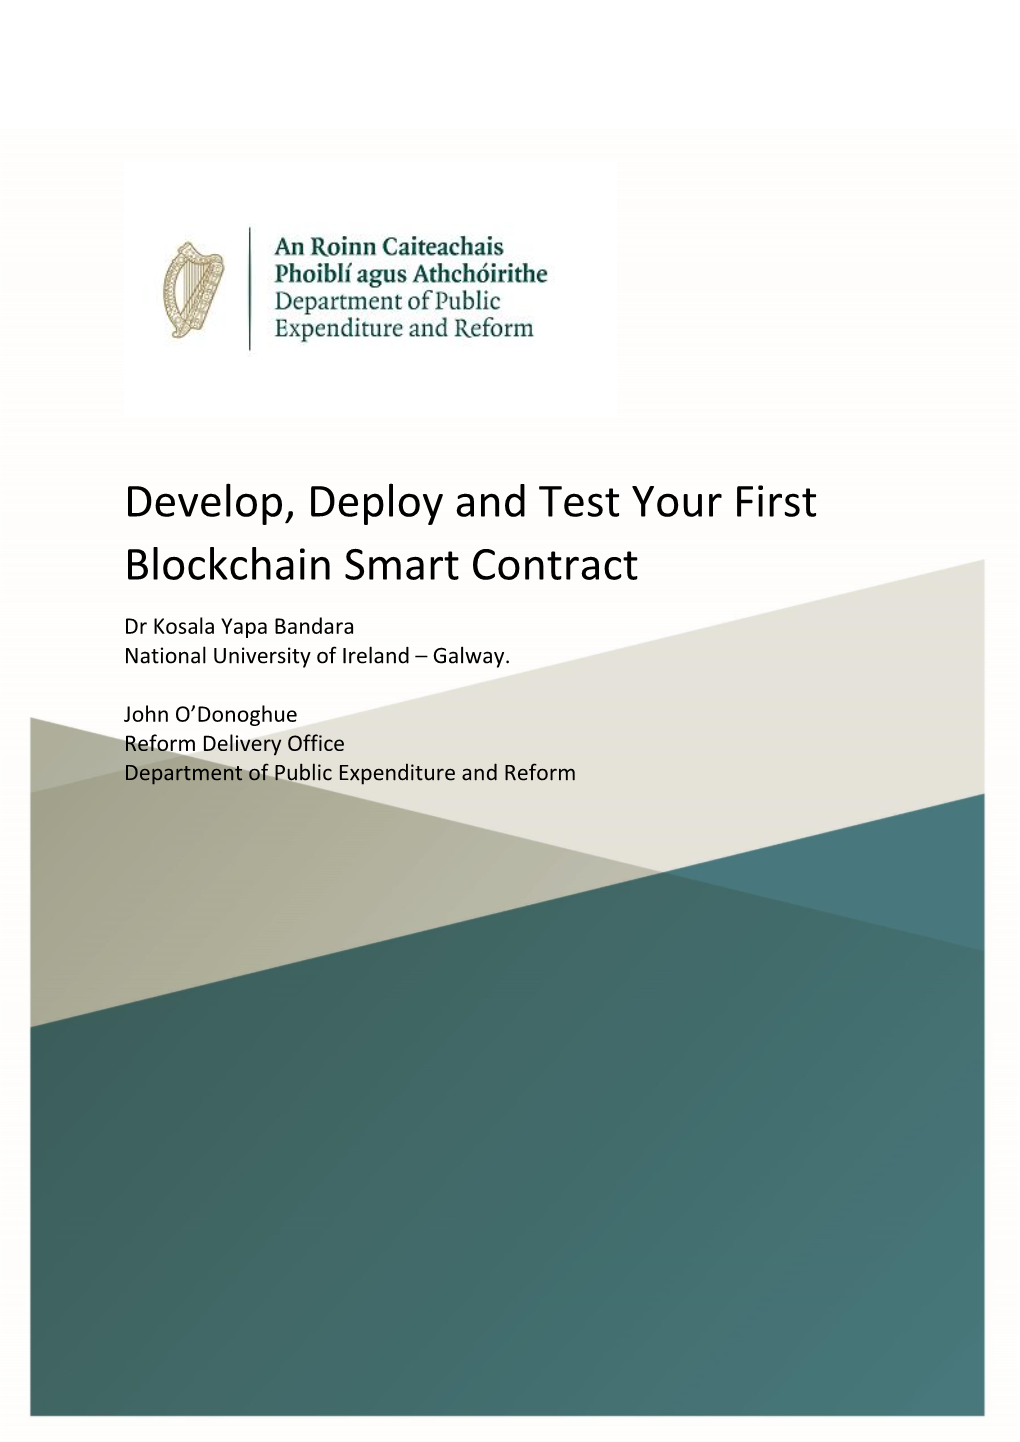 Develop, Deploy and Test Your First Blockchain Smart Contract